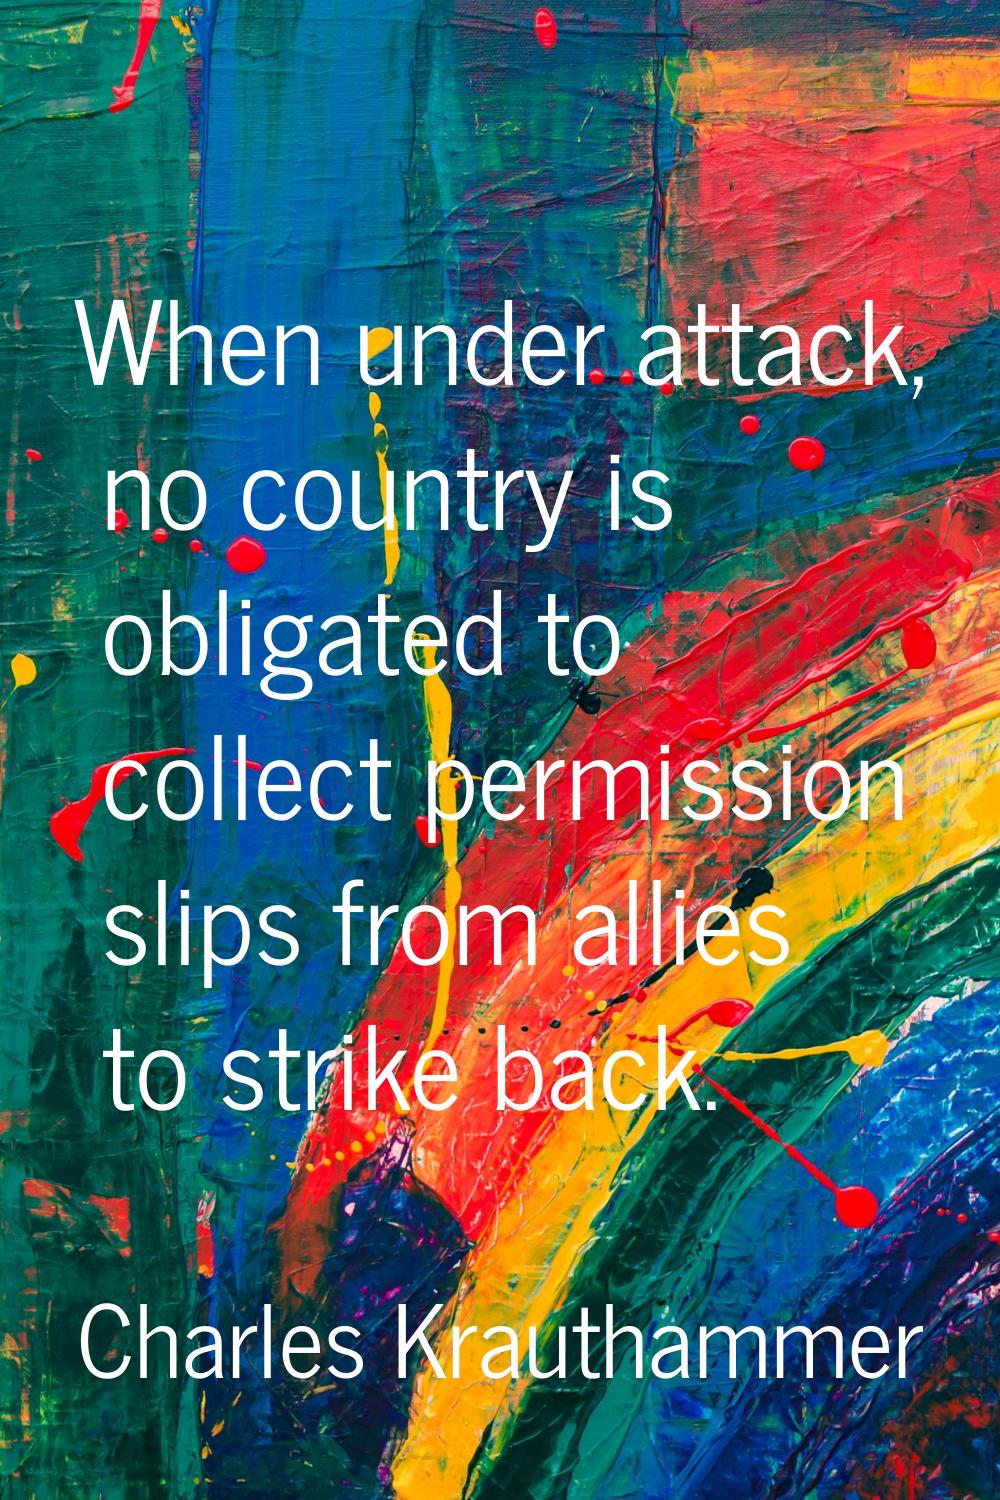 When under attack, no country is obligated to collect permission slips from allies to strike back.